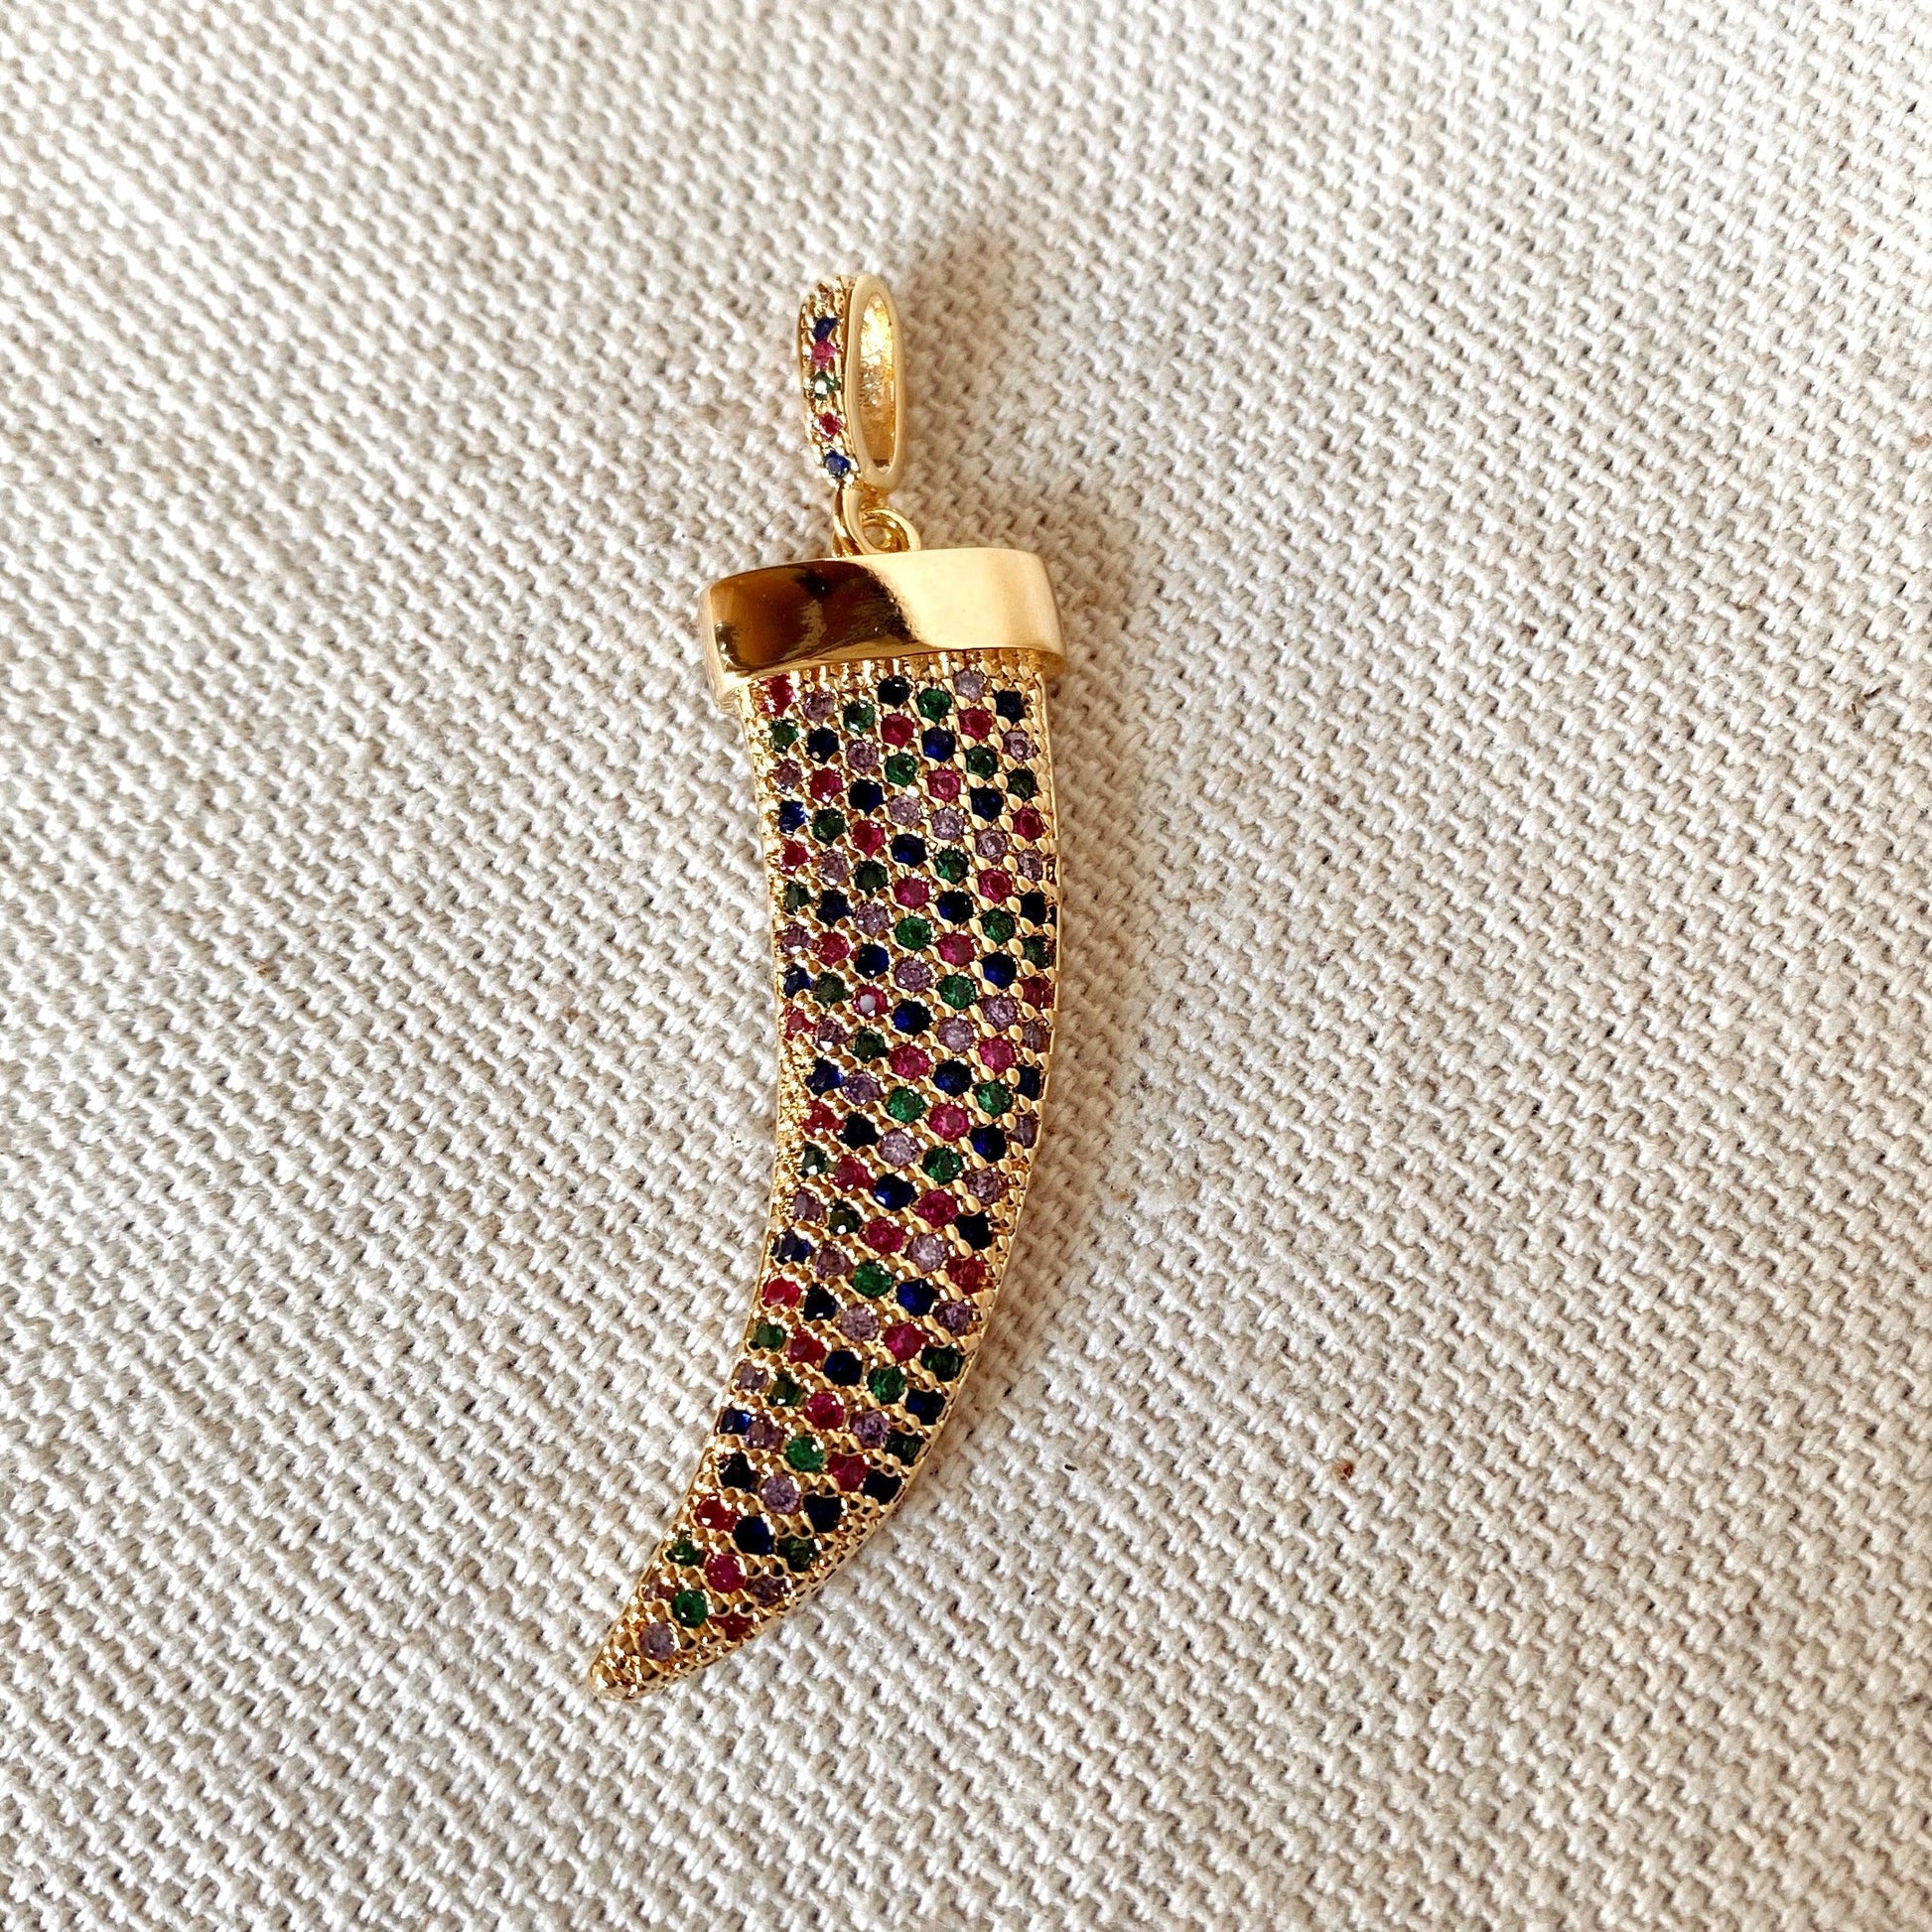 GoldFi Multicolor Cubic Zirconia Tusk Pendant Made of 18k Gold Filled